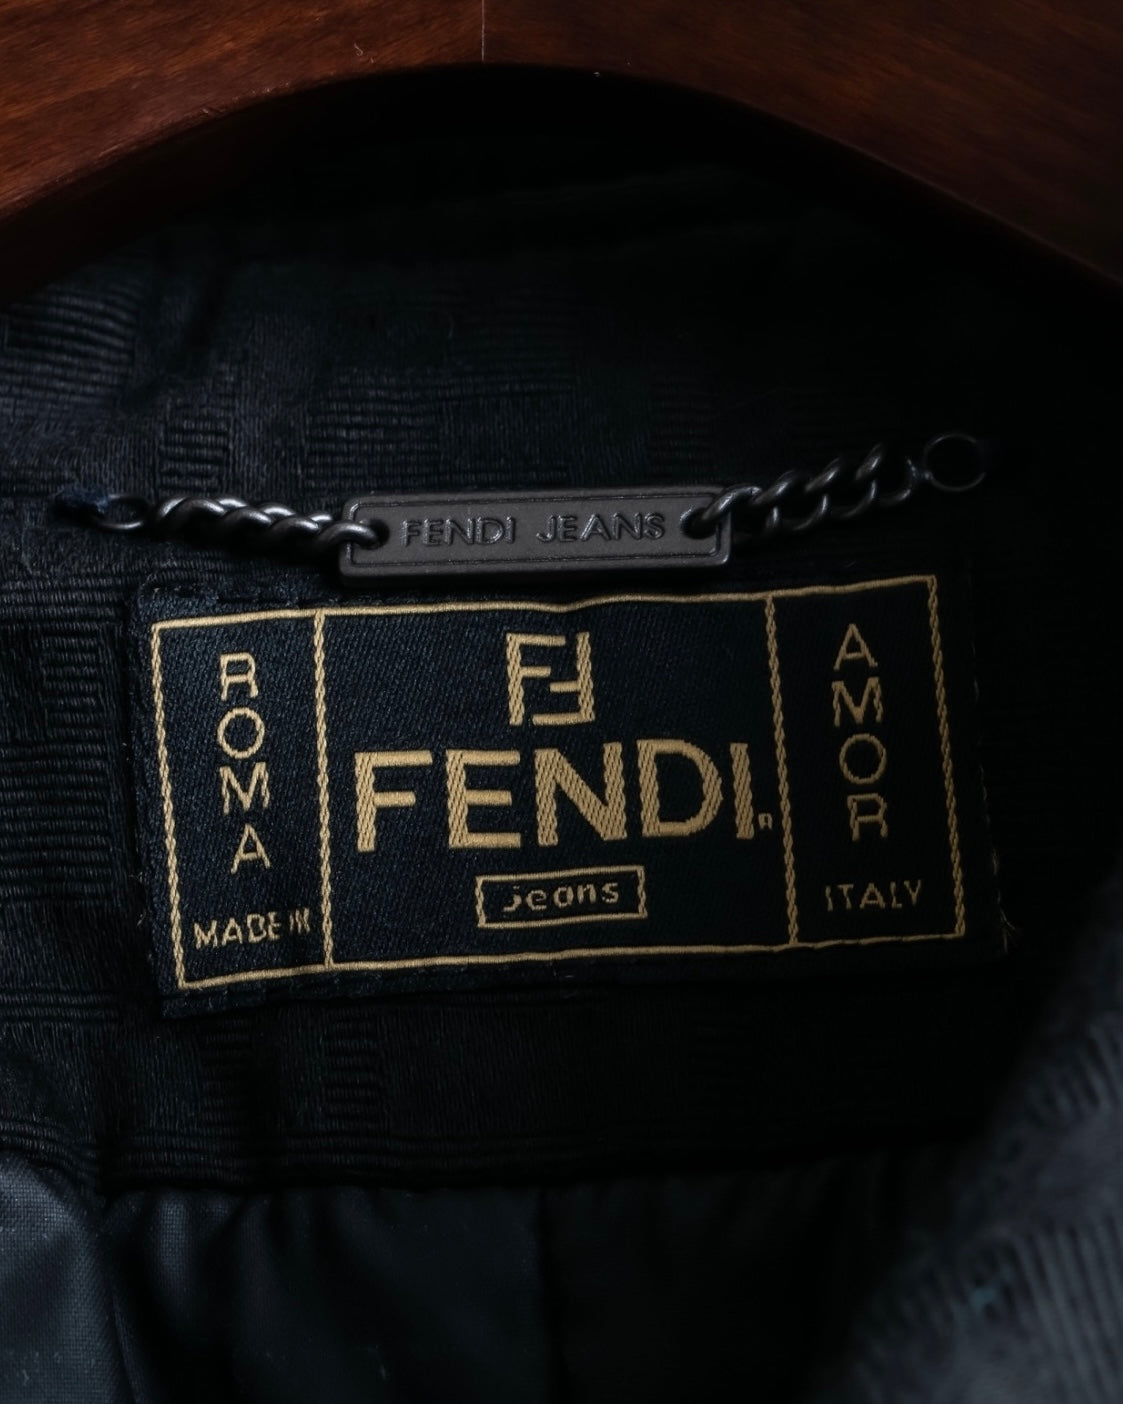 “FENDI jeans” Zucca pattern spring double breasted coat